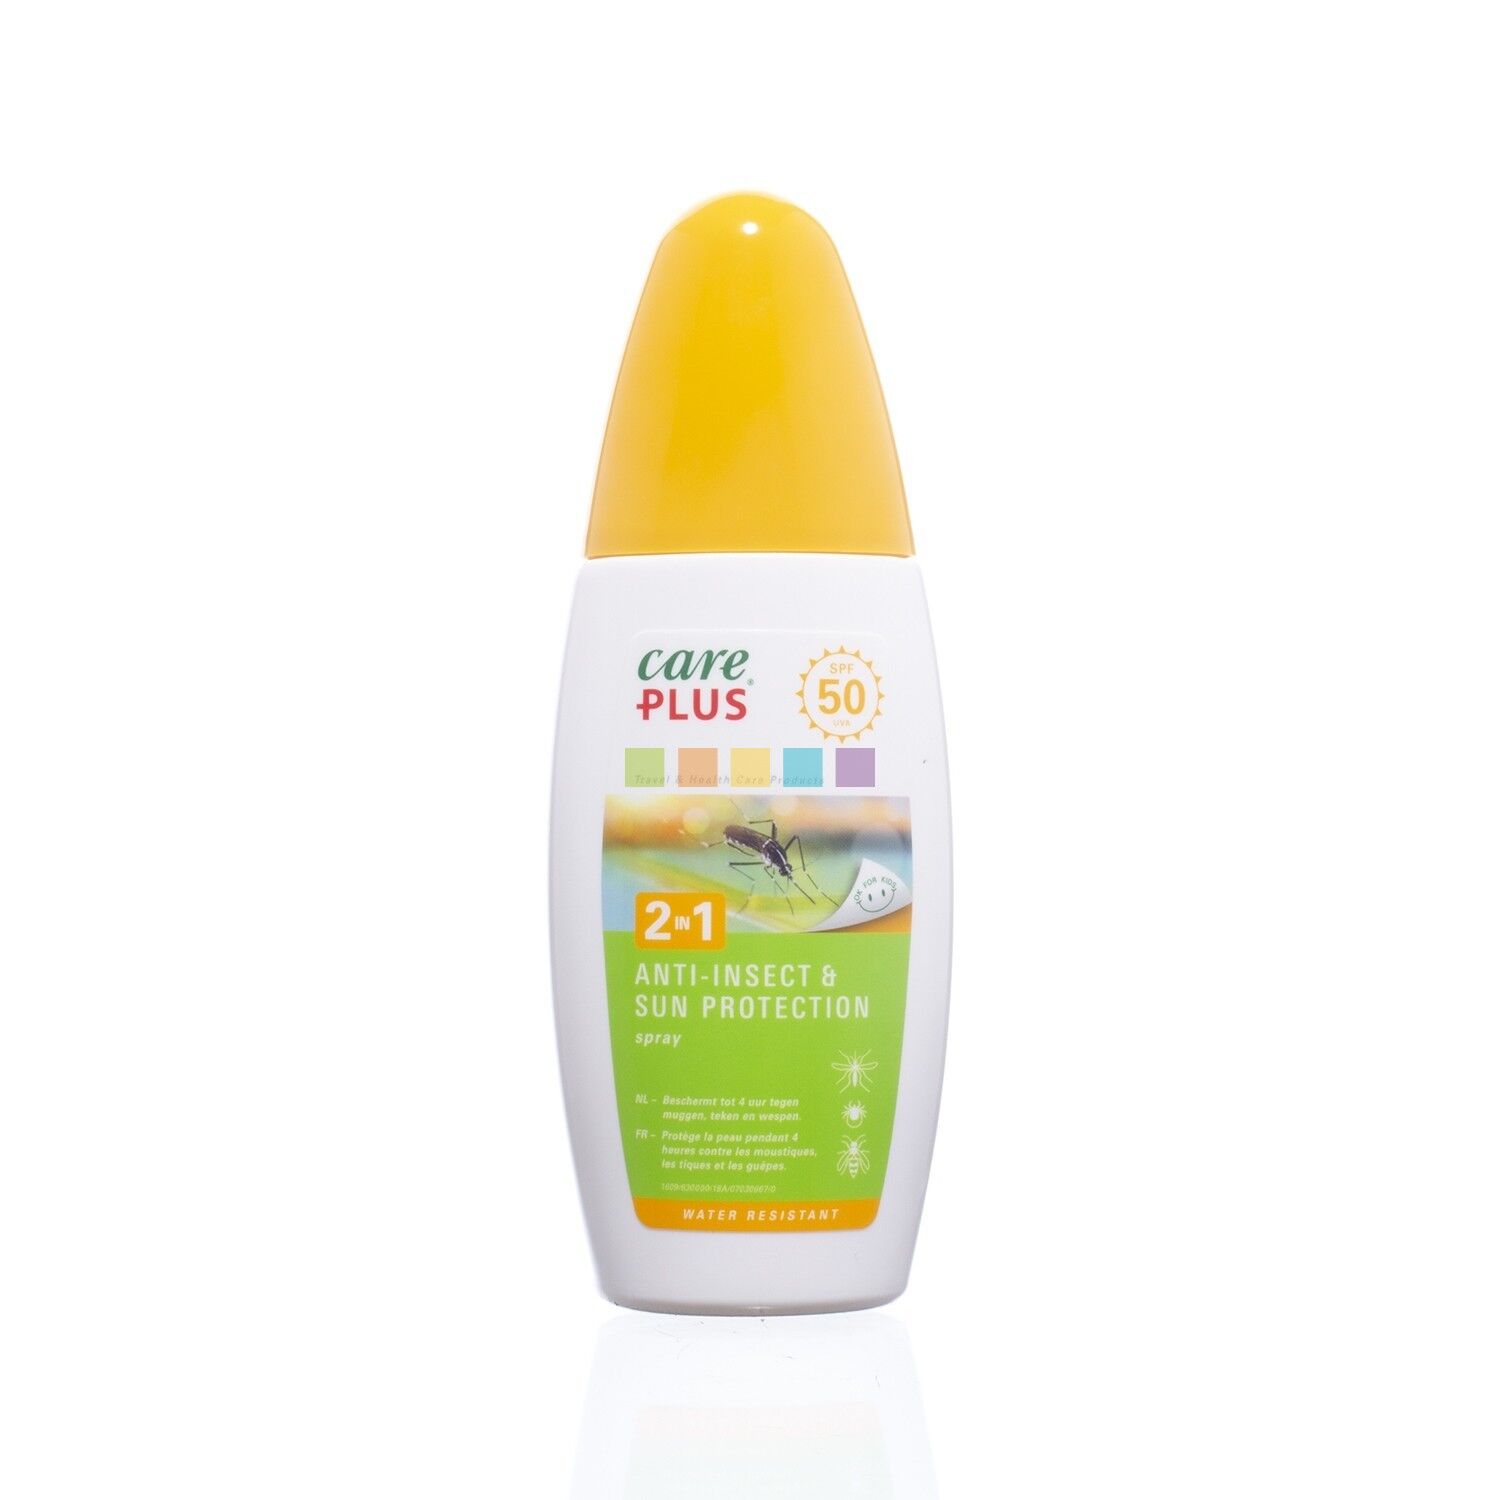 Care Plus 2in1 Anti-Insect & Sun Protection Spray SPF50 - Hyönteismyrkky